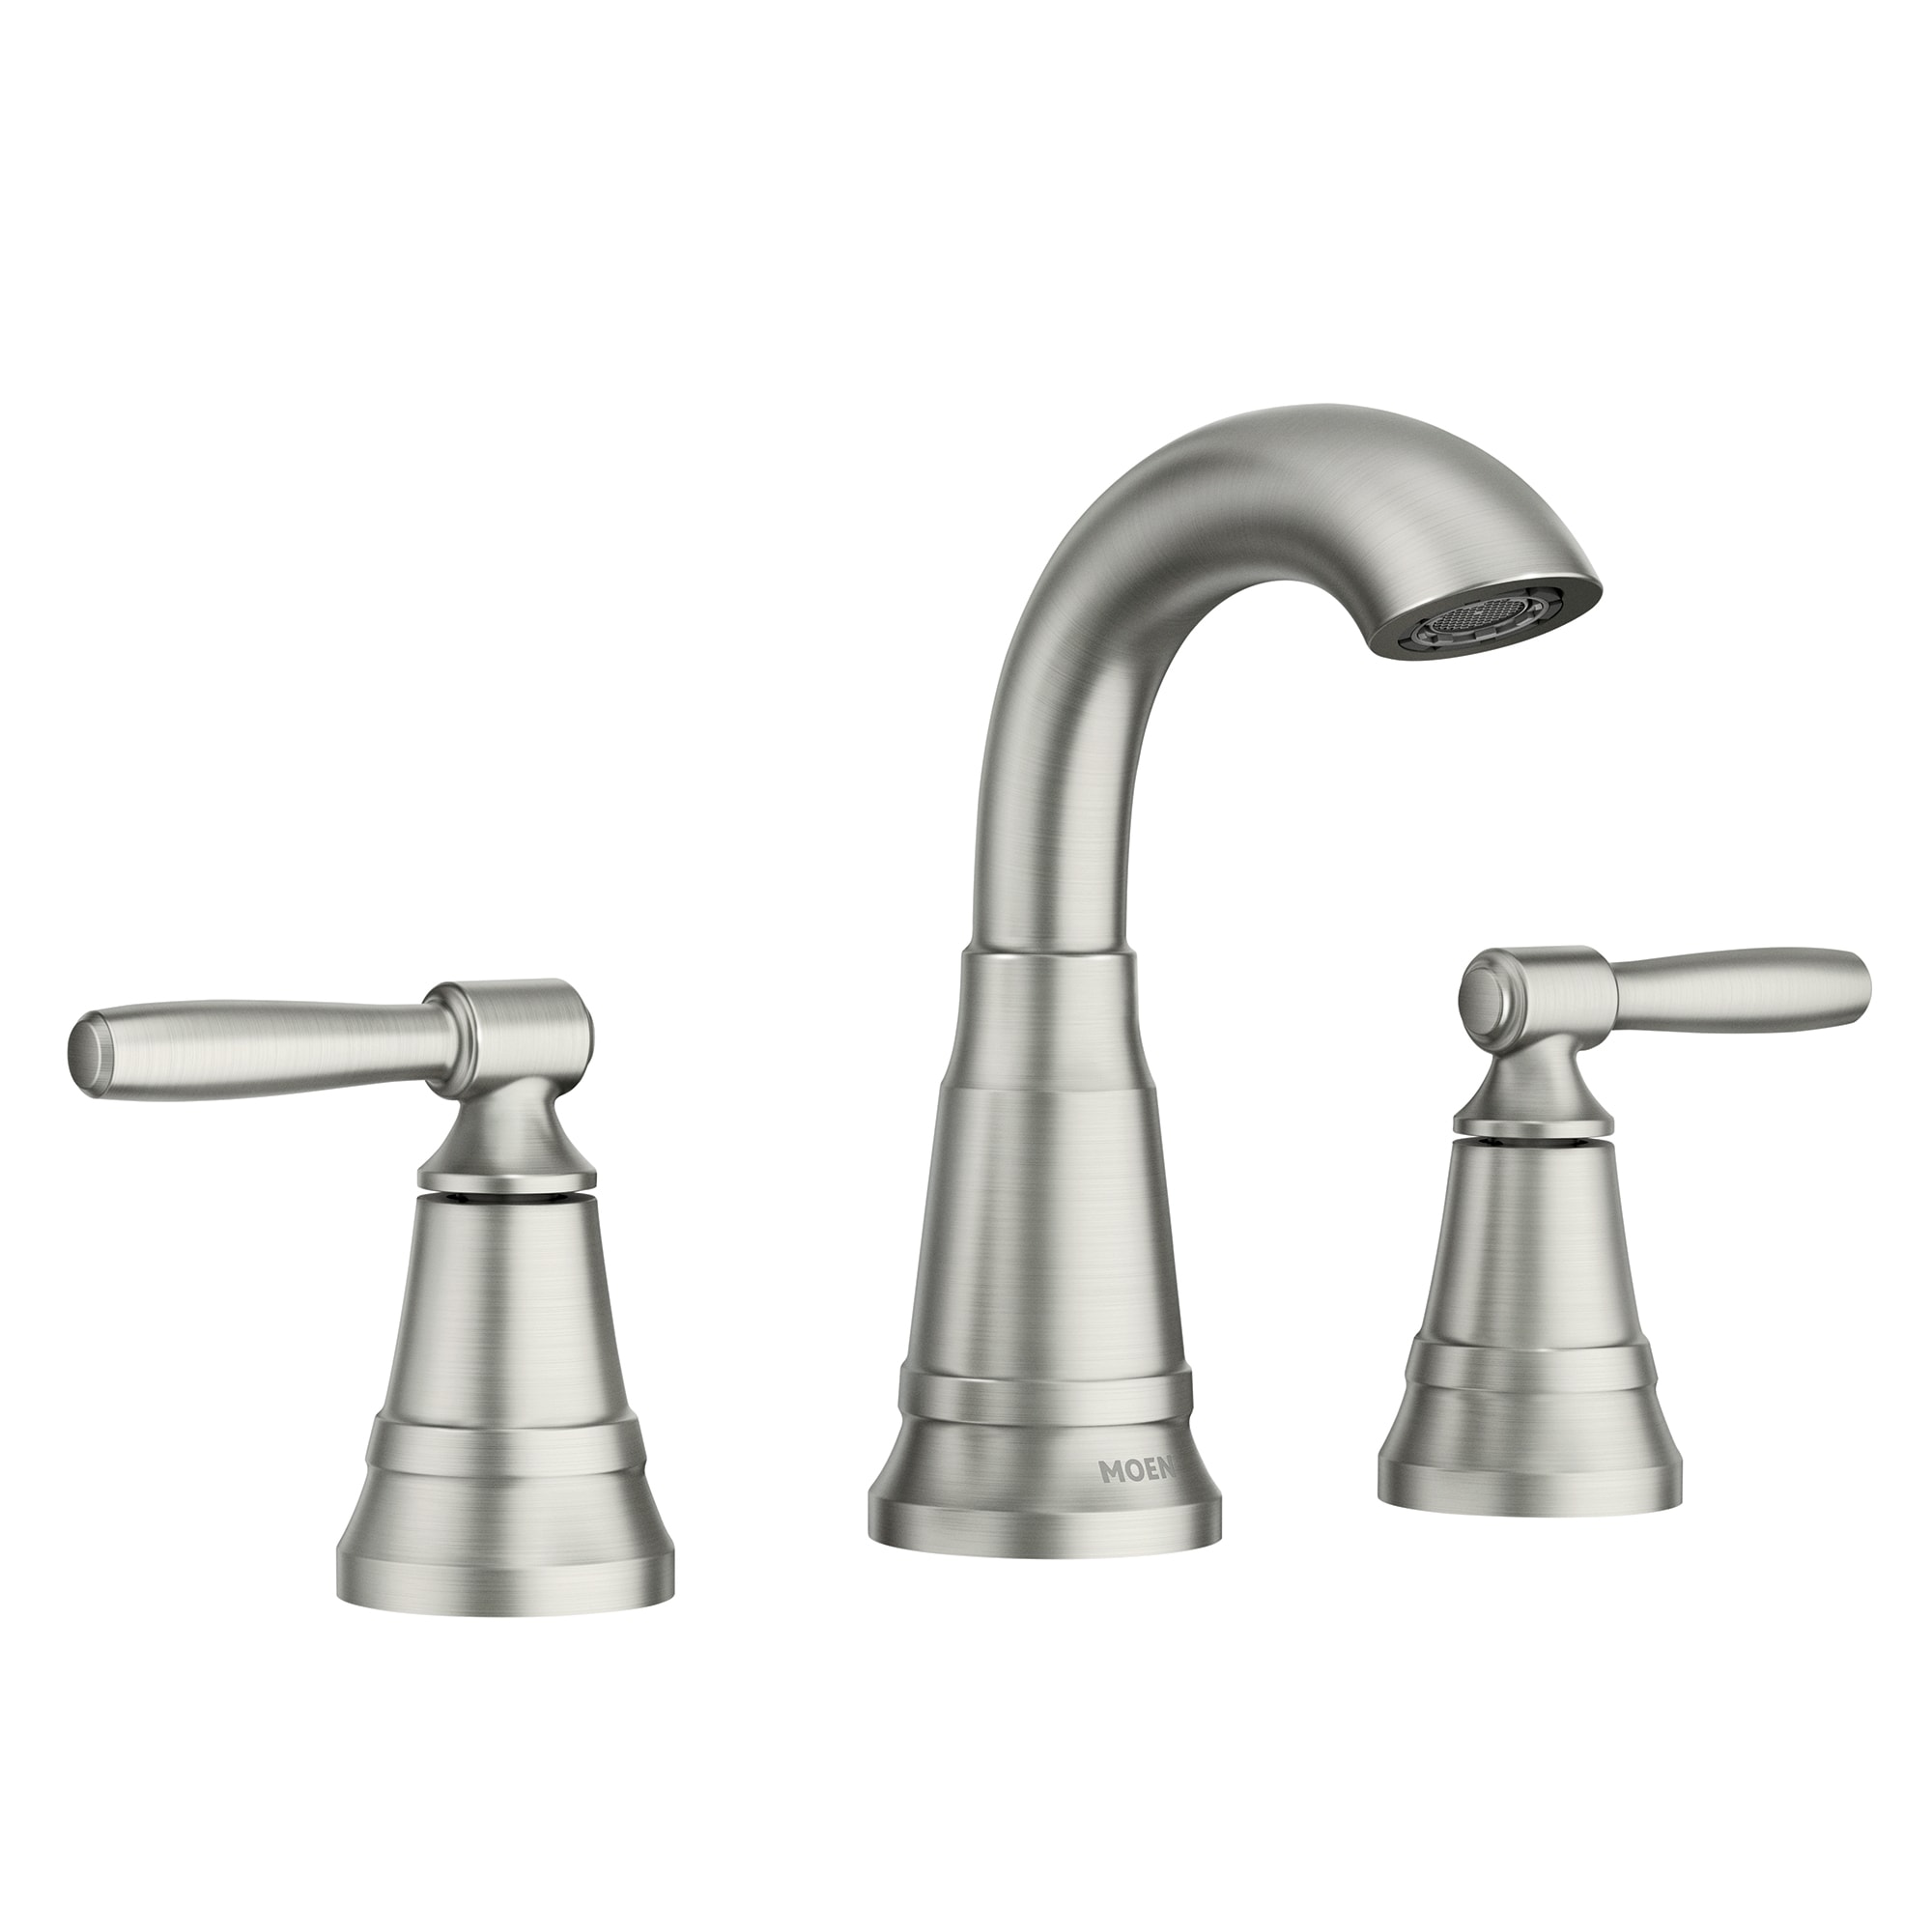 Moen 84971SRN Halle Two-Handle Centerset Bathroom Sink Faucet with Drain Assembly Spot Resist Brushed Nickel 